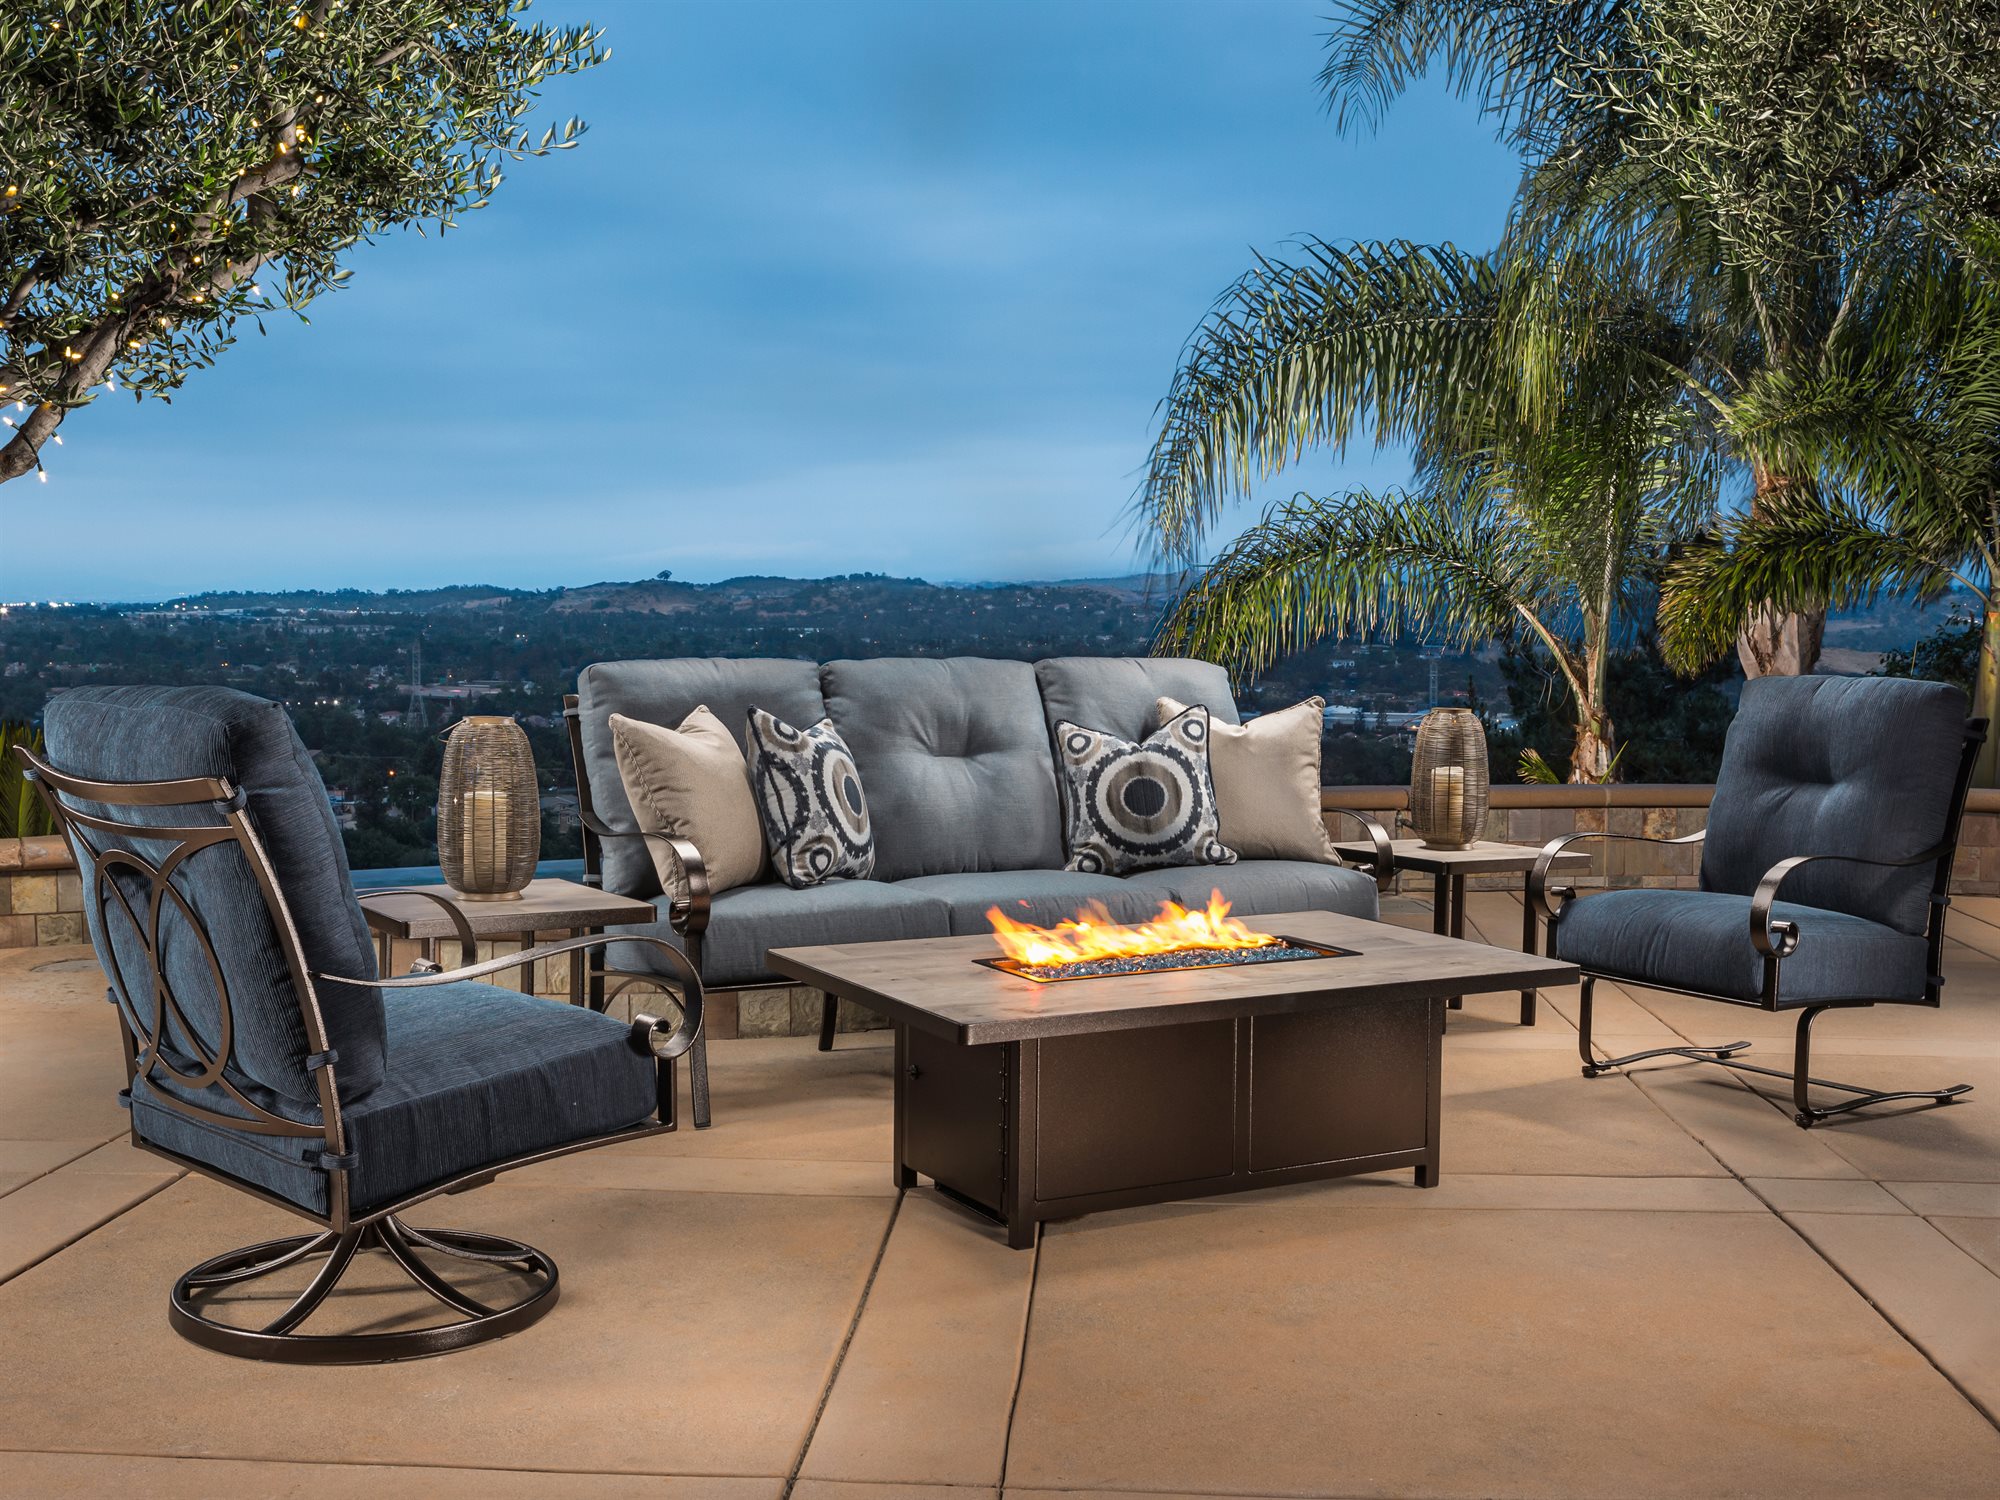 Ow Lee Pasadera Steel Fire Pit Lounge, Ow Lee Fire Pits